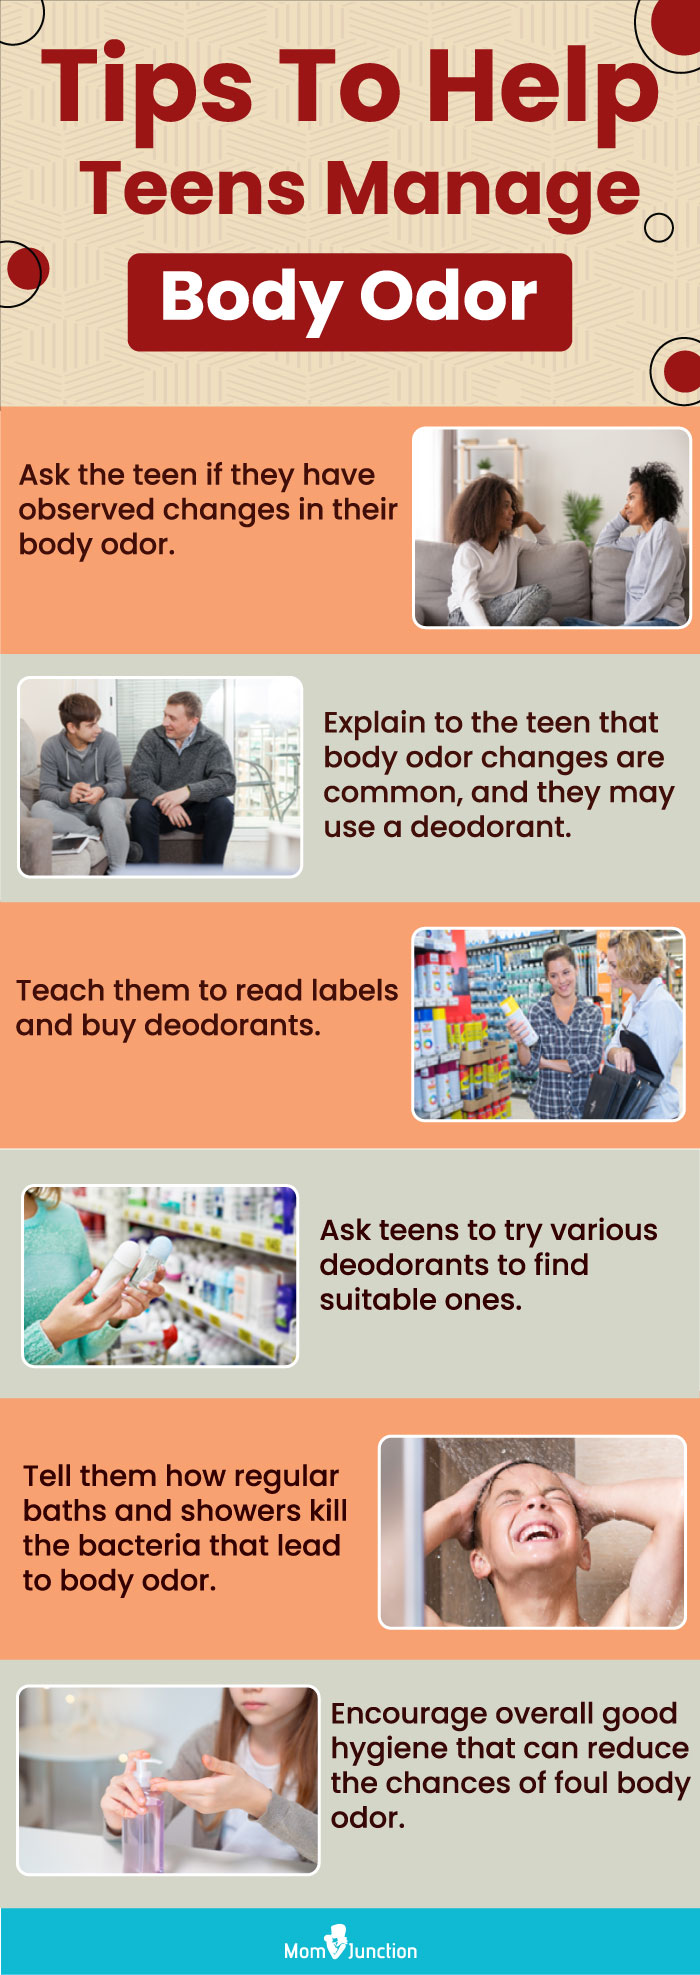 tips to help teens manage body odor(infographic)